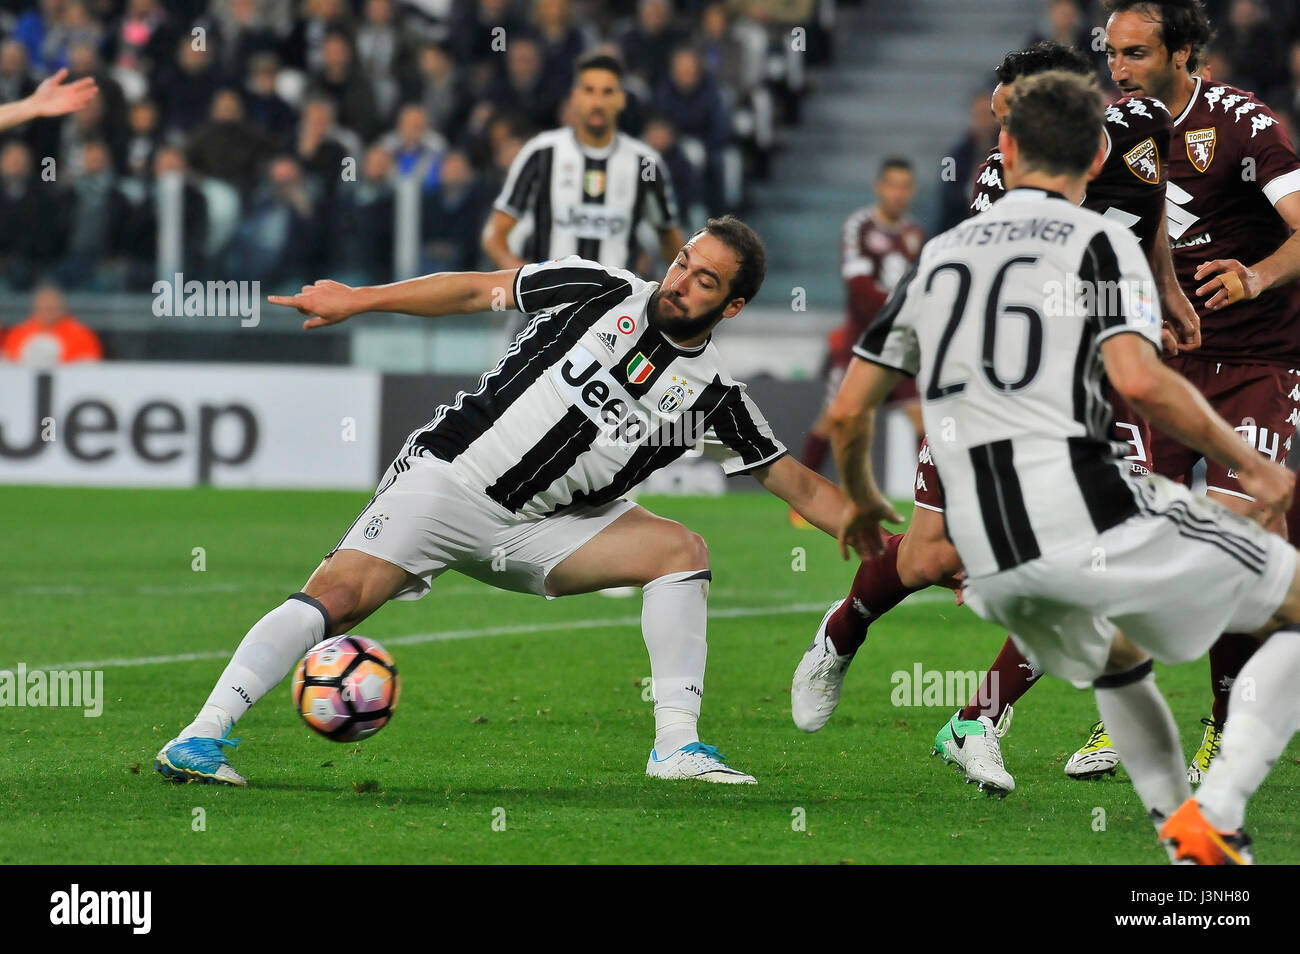 Turin, Italy. 6th May, 2017. Gonzalo Higuain during the match Serie A TIM between  Juventus FC and  Torino FC at Juventus Stadium. The final result of the match is 1-1. Credit: Fabio Petrosino/Alamy Live News Stock Photo